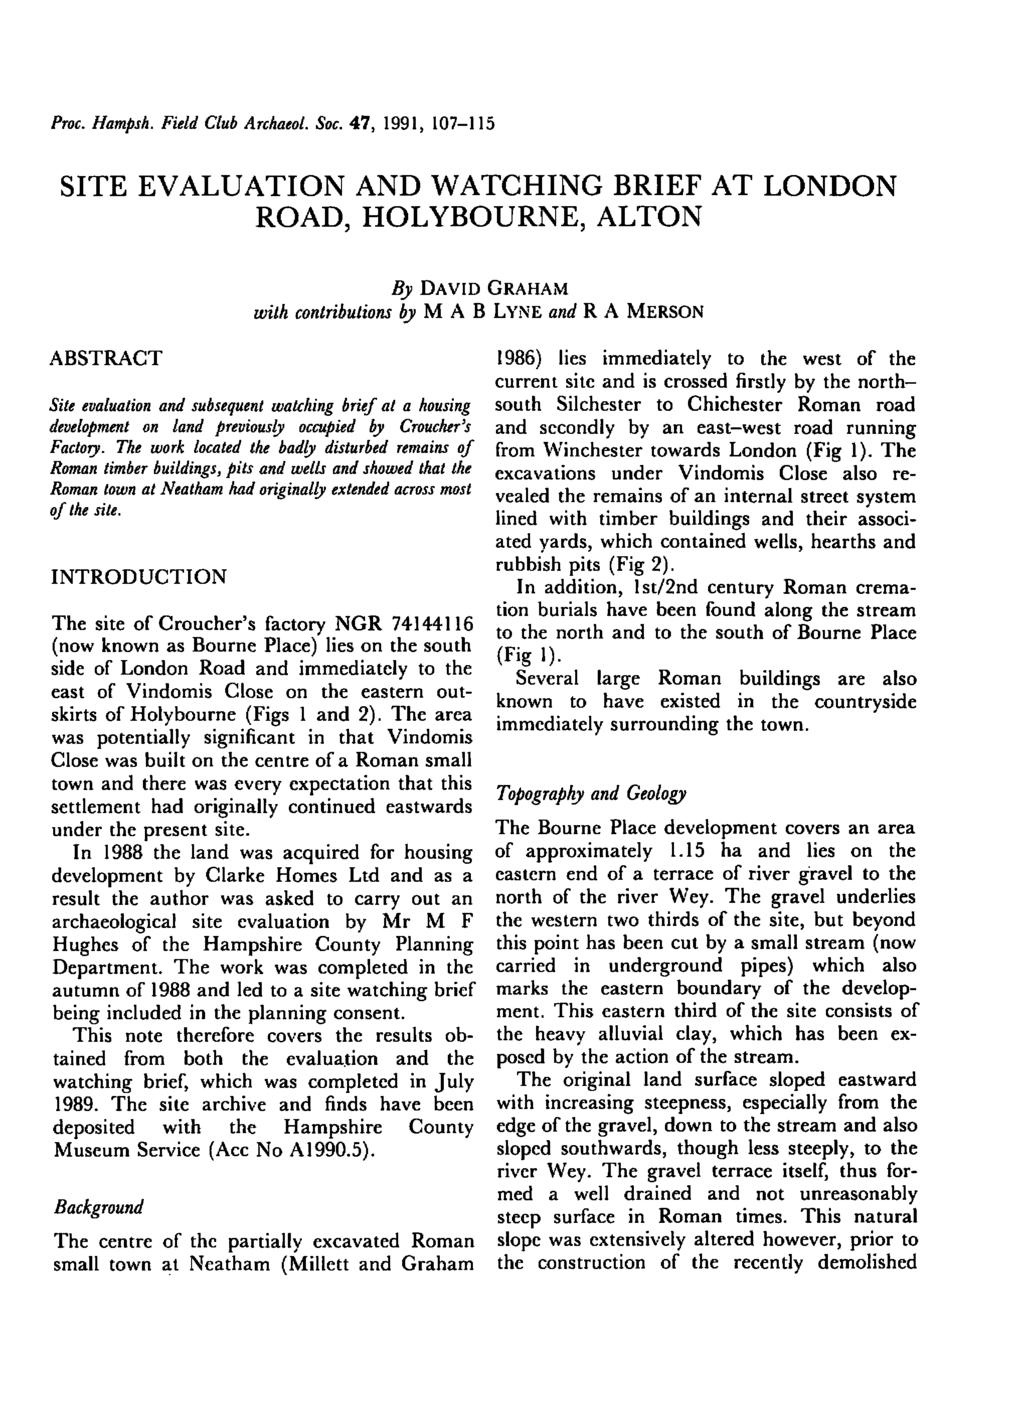 Proc. Hampsh. Field Club Archaeol. Soc. 47, 1991, 107-115 SITE EVALUATION AND WATCHING BRIEF AT LONDON ROAD, HOLYBOURNE, ALTON By DAVID GRAHAM with contributions by M A B L.